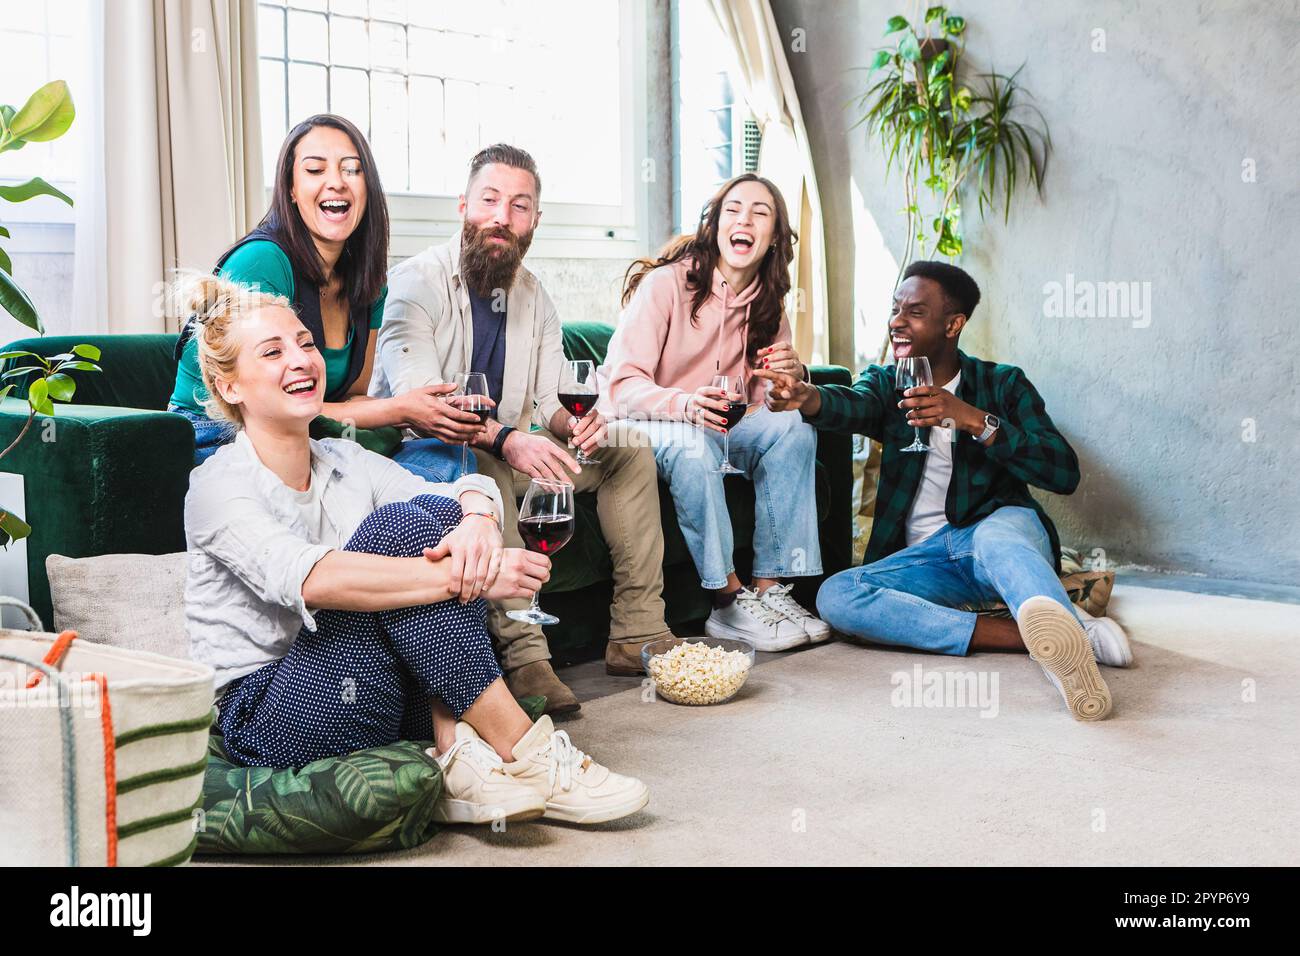 Playful scene of friends at home laughing and joking with each other. Fun evening among young boys. Multiethnic group indoors Stock Photo